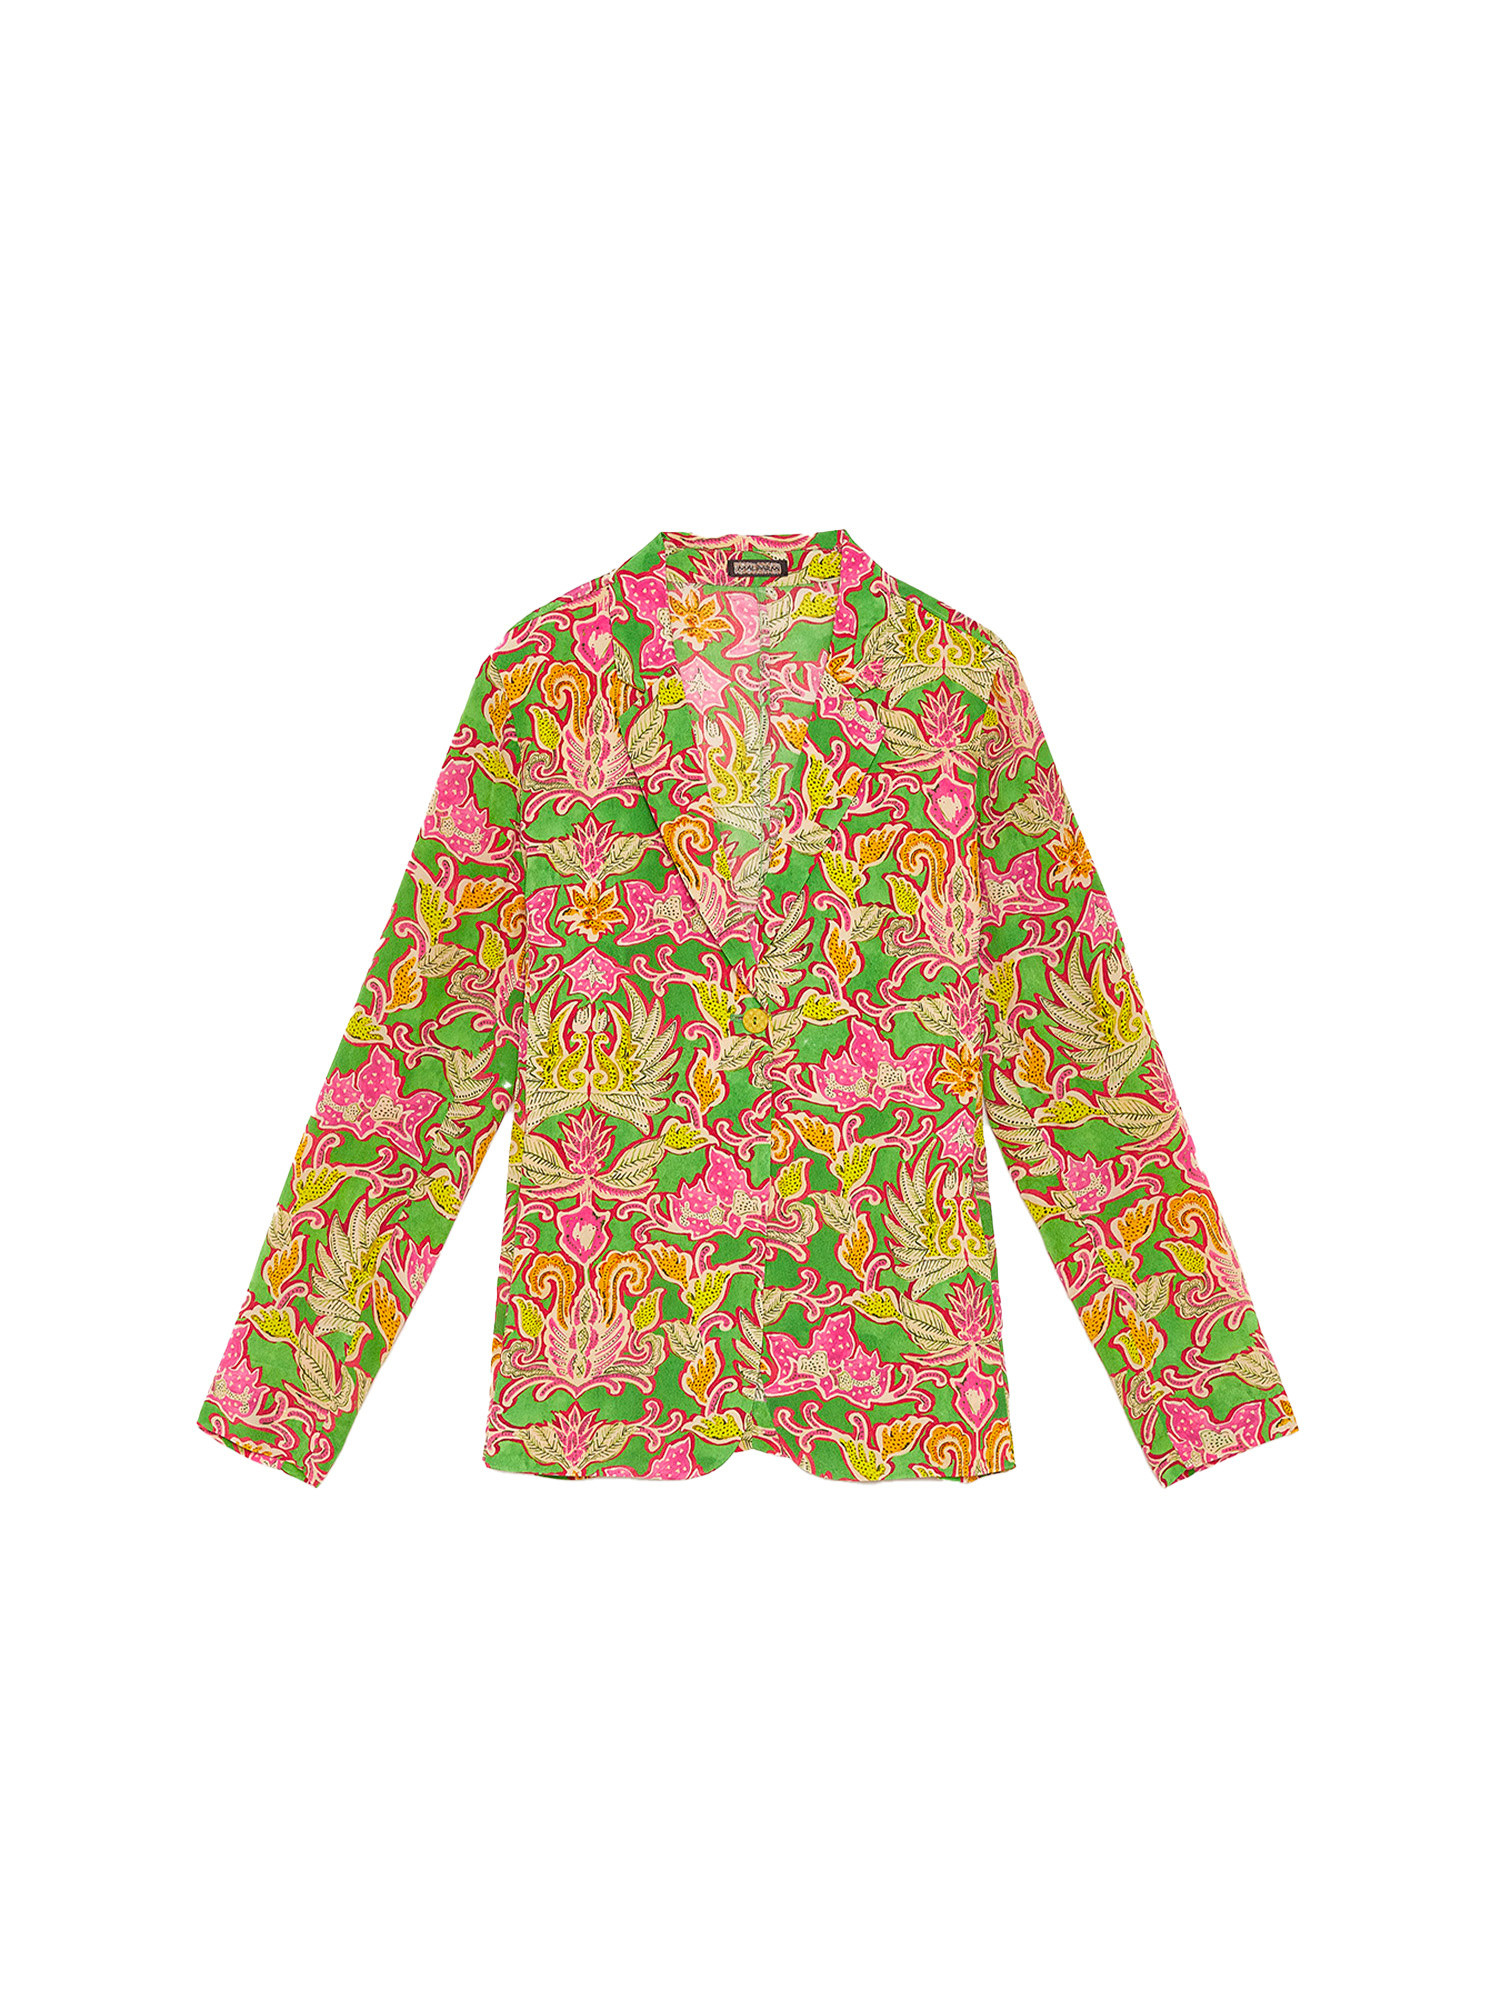 Crepe tropic aroma jacket, Multicolor, large image number 0